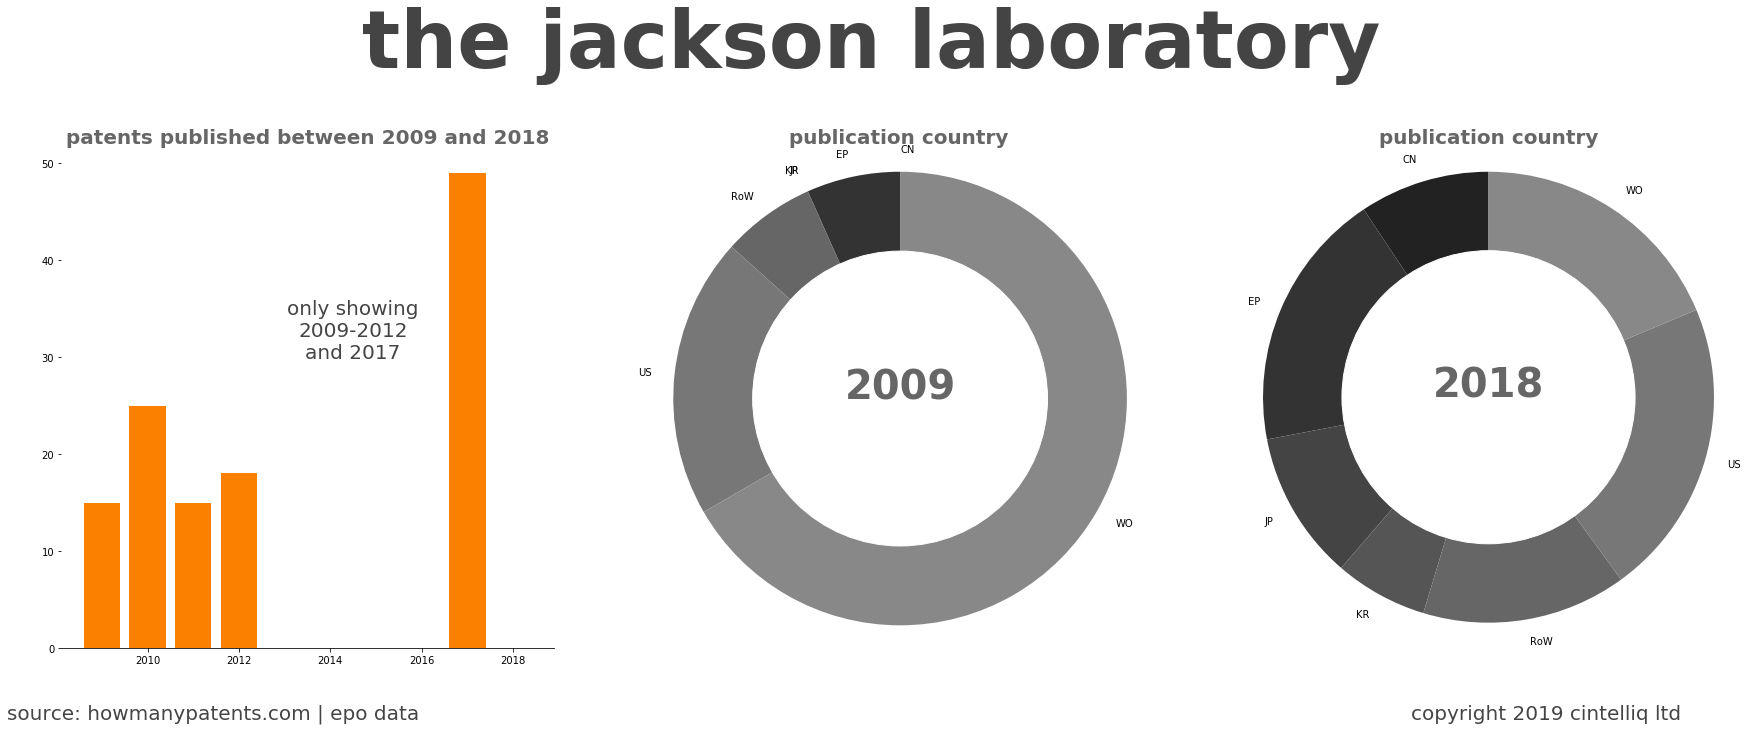 summary of patents for The Jackson Laboratory